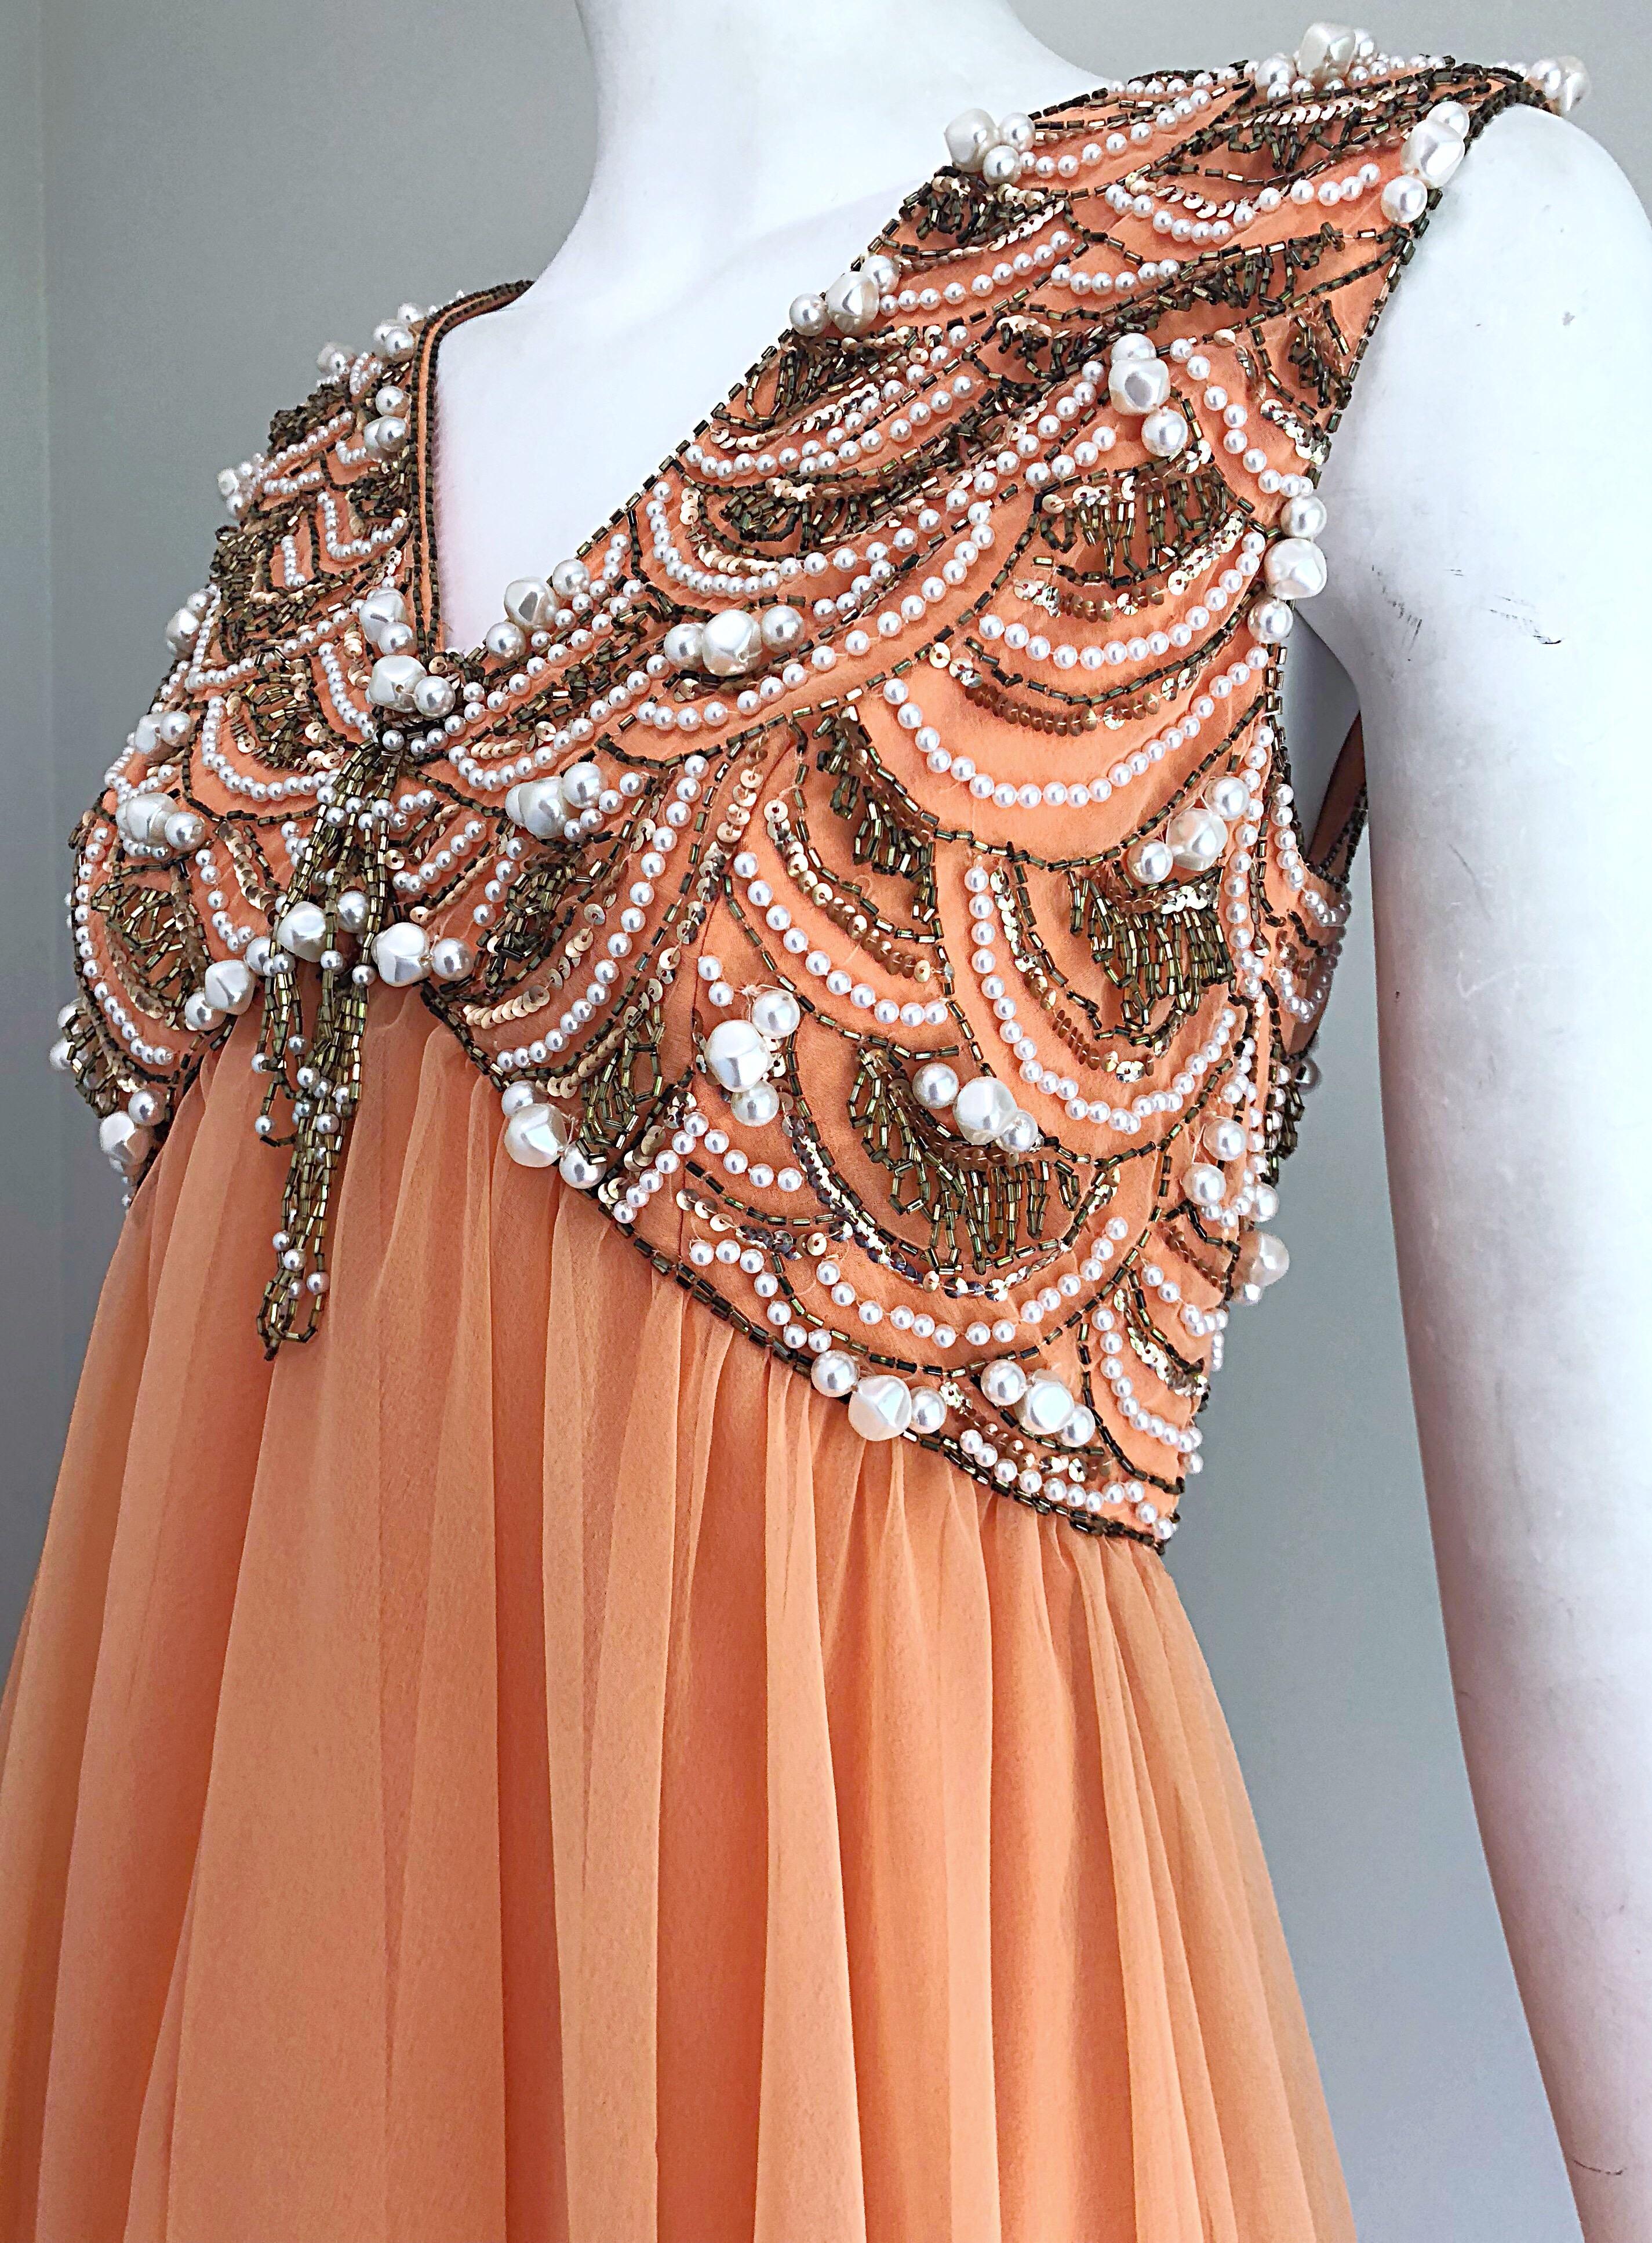 1960s Isabell Gerhart Sherbet Coral Demi Couture Beaded Chiffon 60s Gown Dress For Sale 1